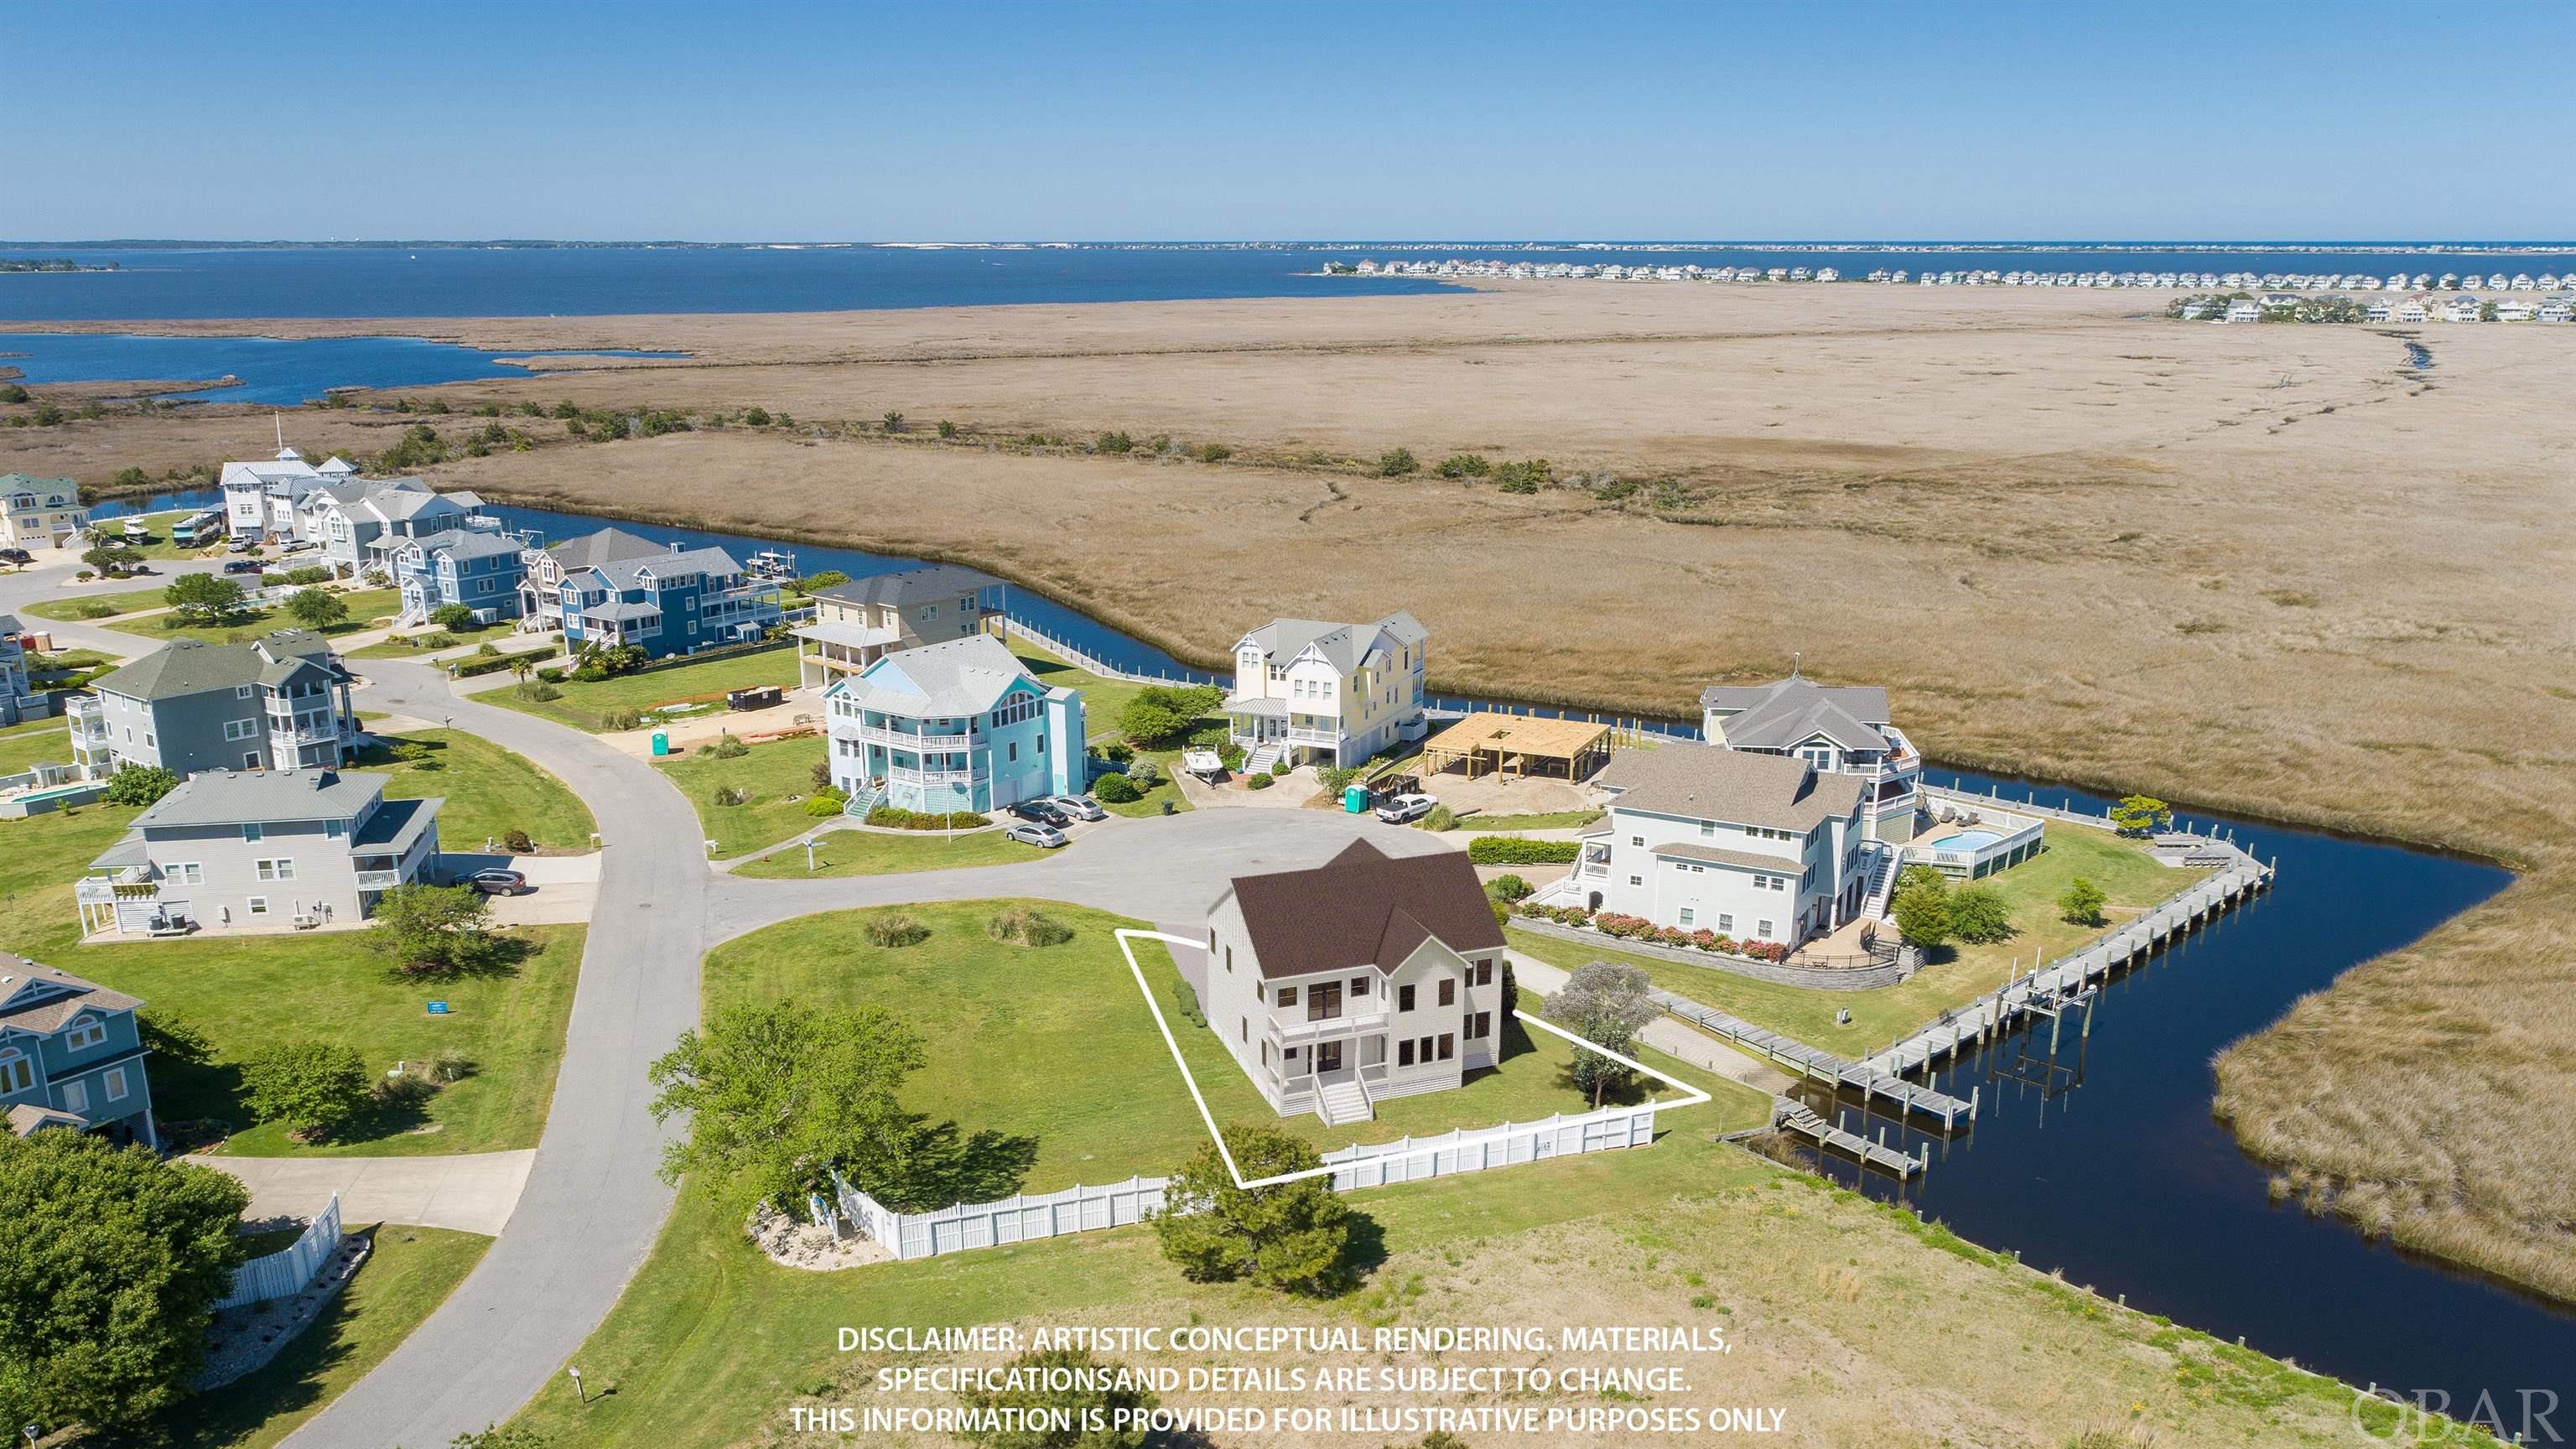 Spectacular views from this canal front homesite close to beach and downtown Manteo! Situated on a private cul-de-sac and in the very desirable neighborhood of Peninsula, this homesite offers 30 feet of dock frontage and is right next to the community boat ramp! With only a short boat ride to Oregon Inlet, this lot offers protection and convenience. Build your dream home today!  Seller will consider owner financing!